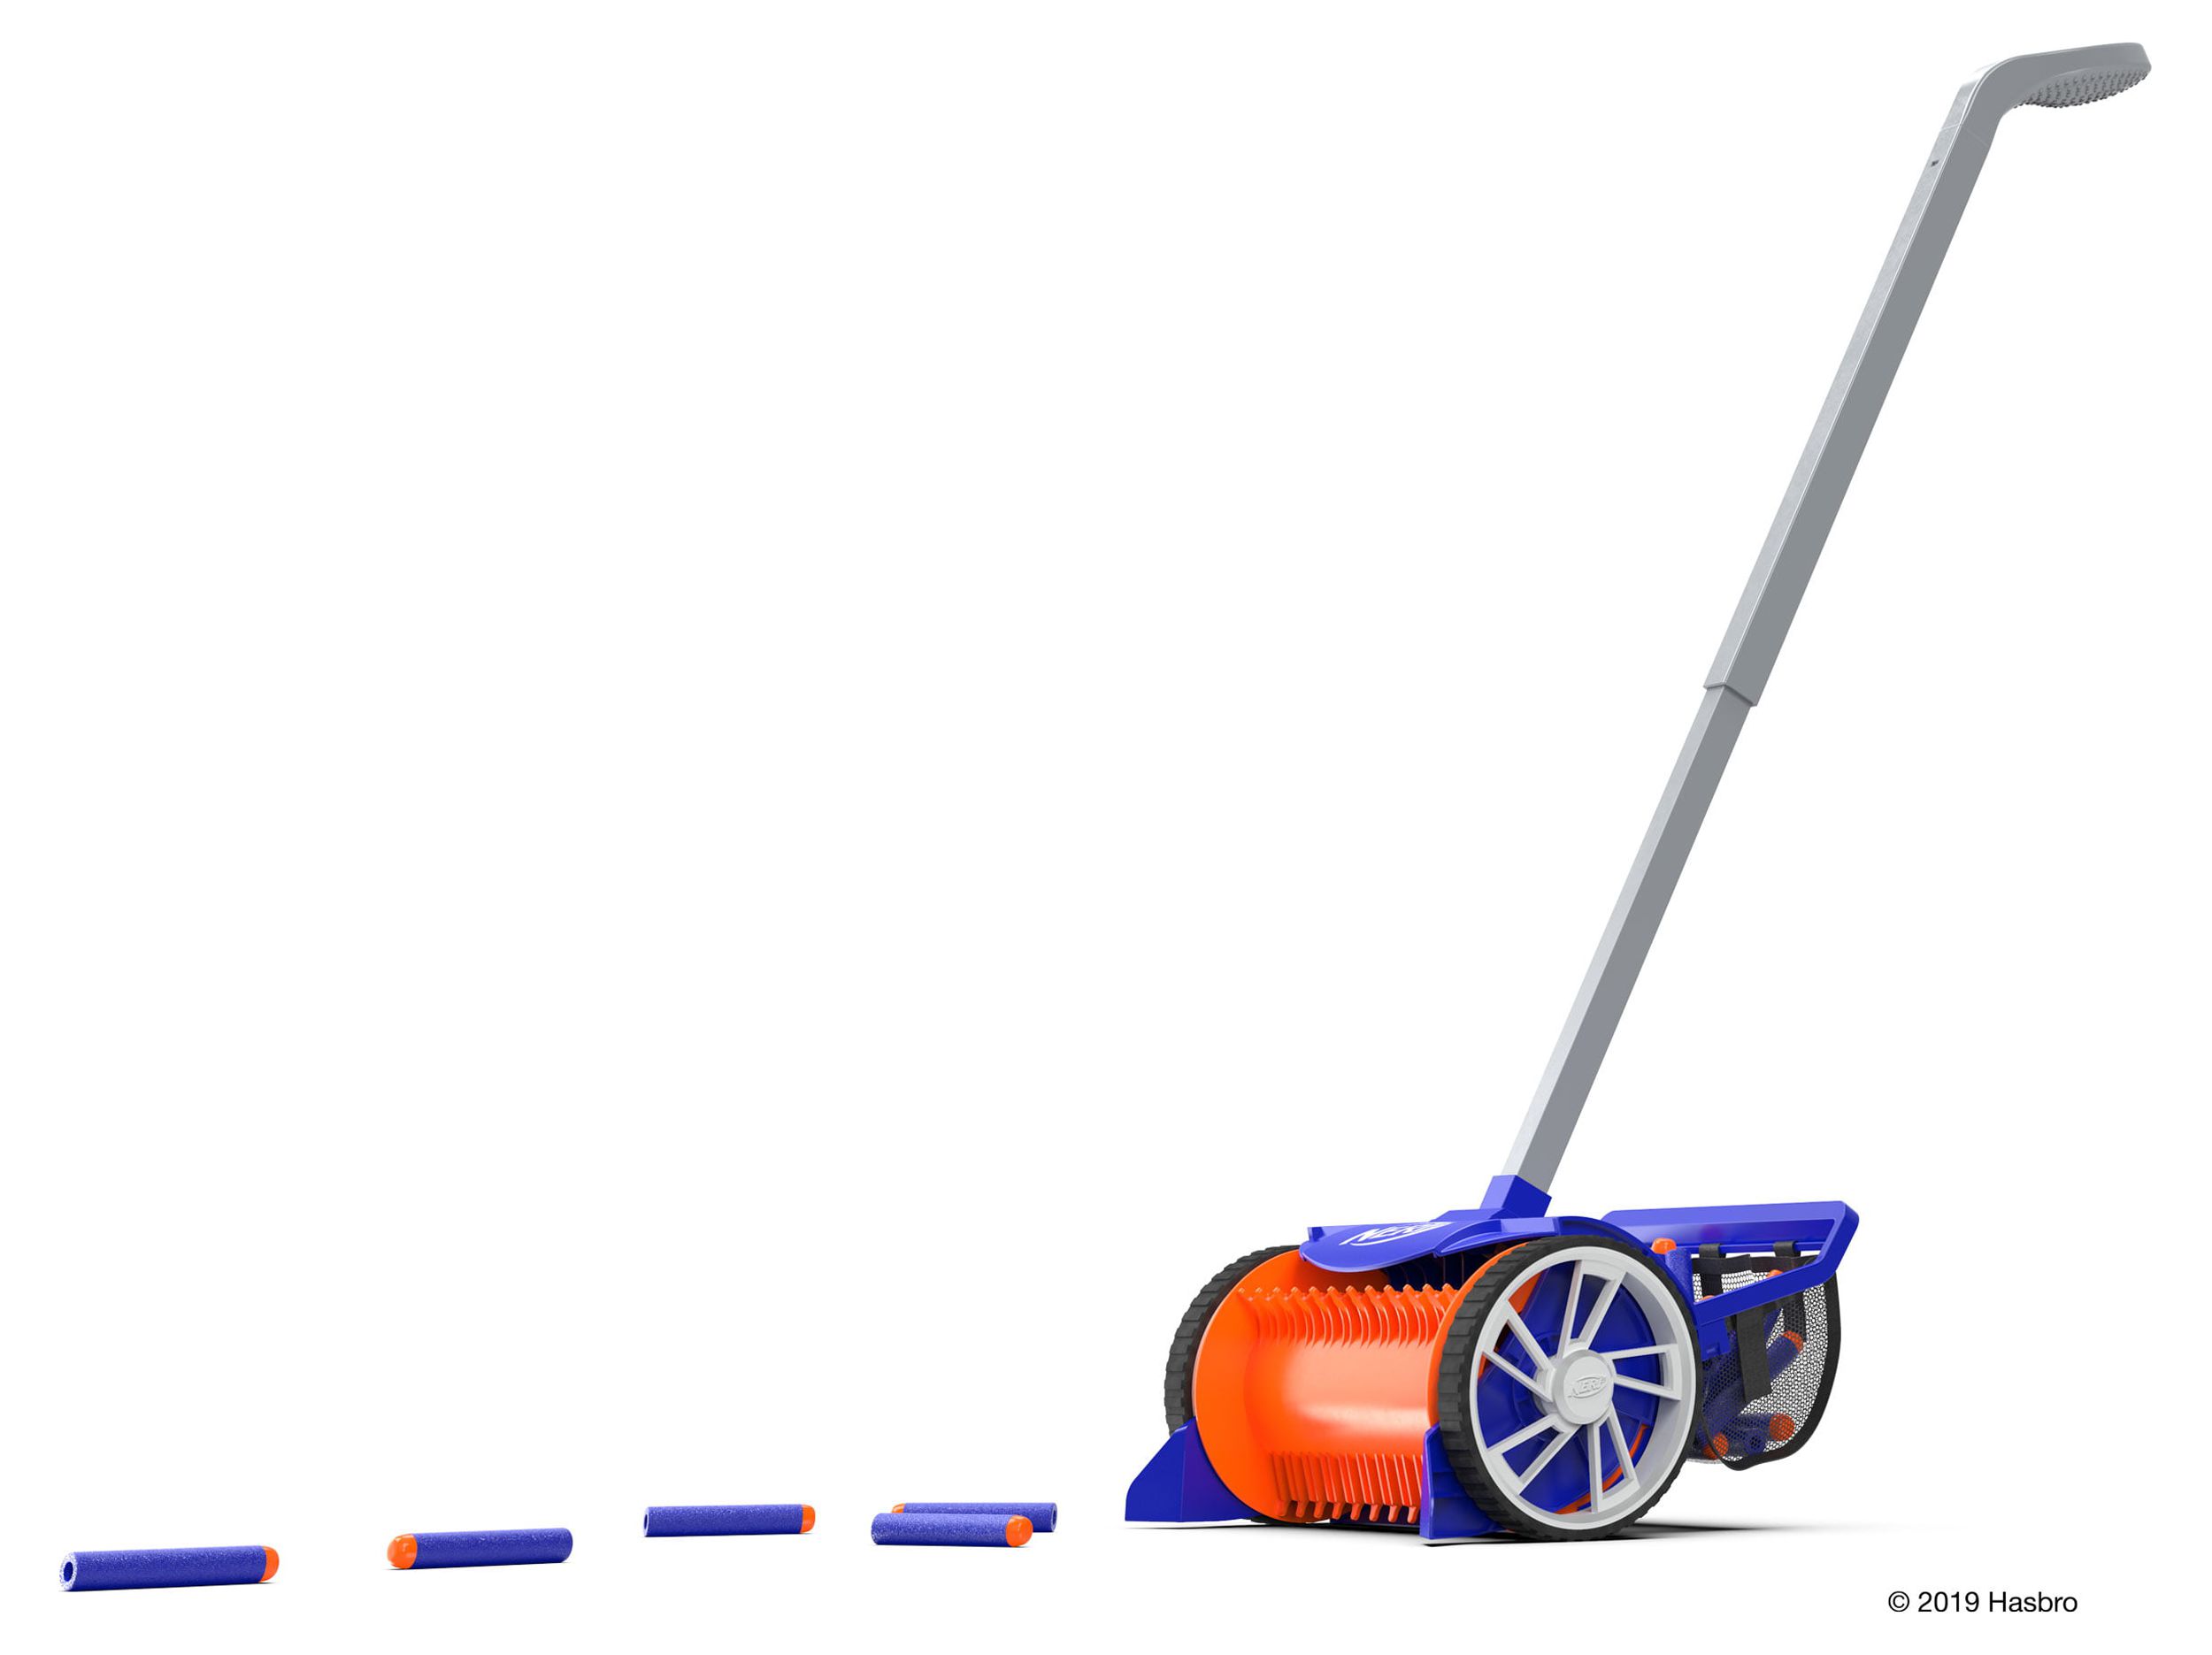 Nerf Elite Dart Rover Toy Clean Pick Up Darts - image 1 of 11